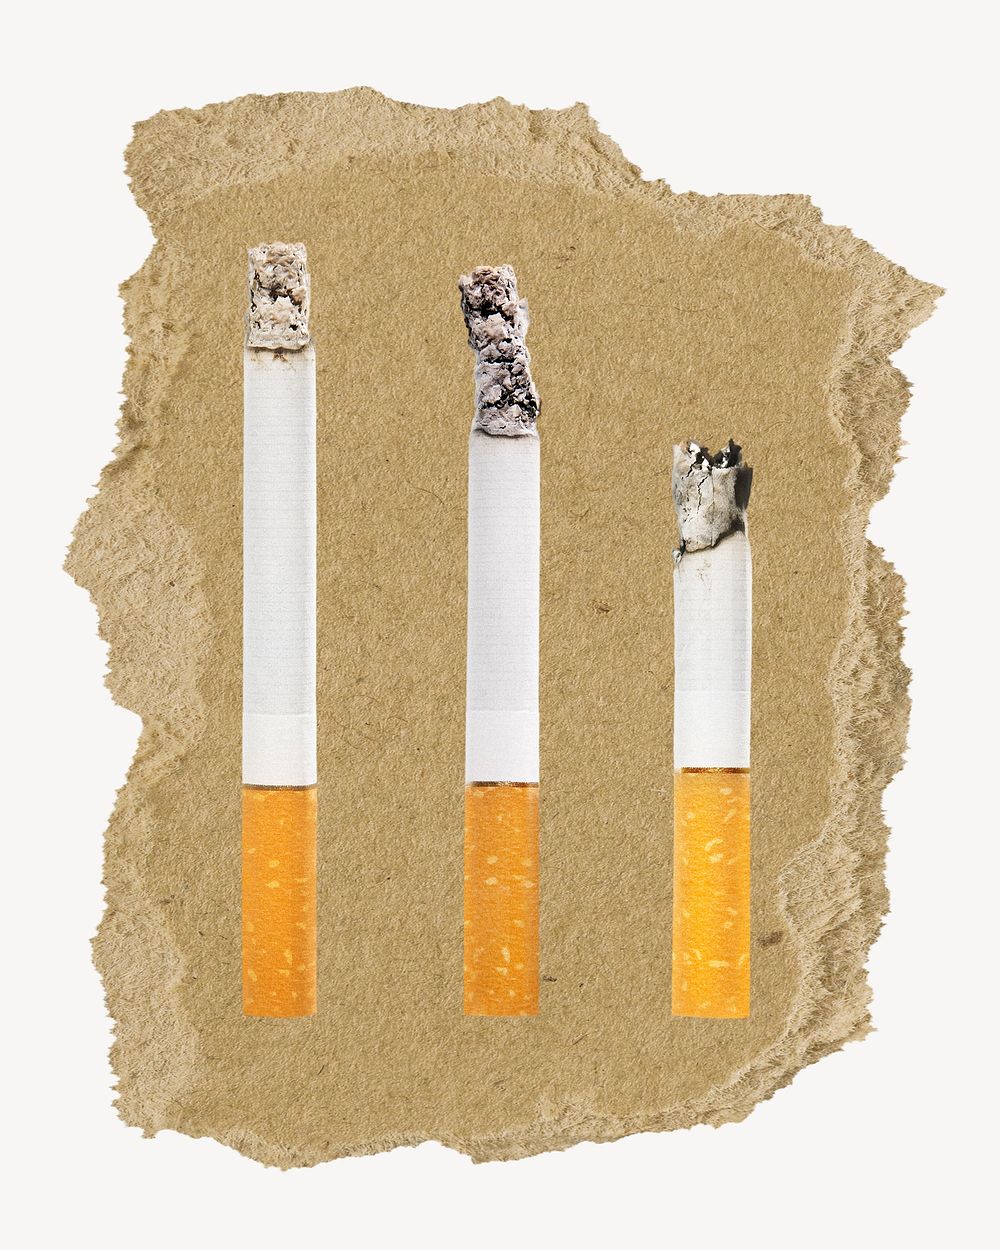 Cigarettes, ripped paper collage element